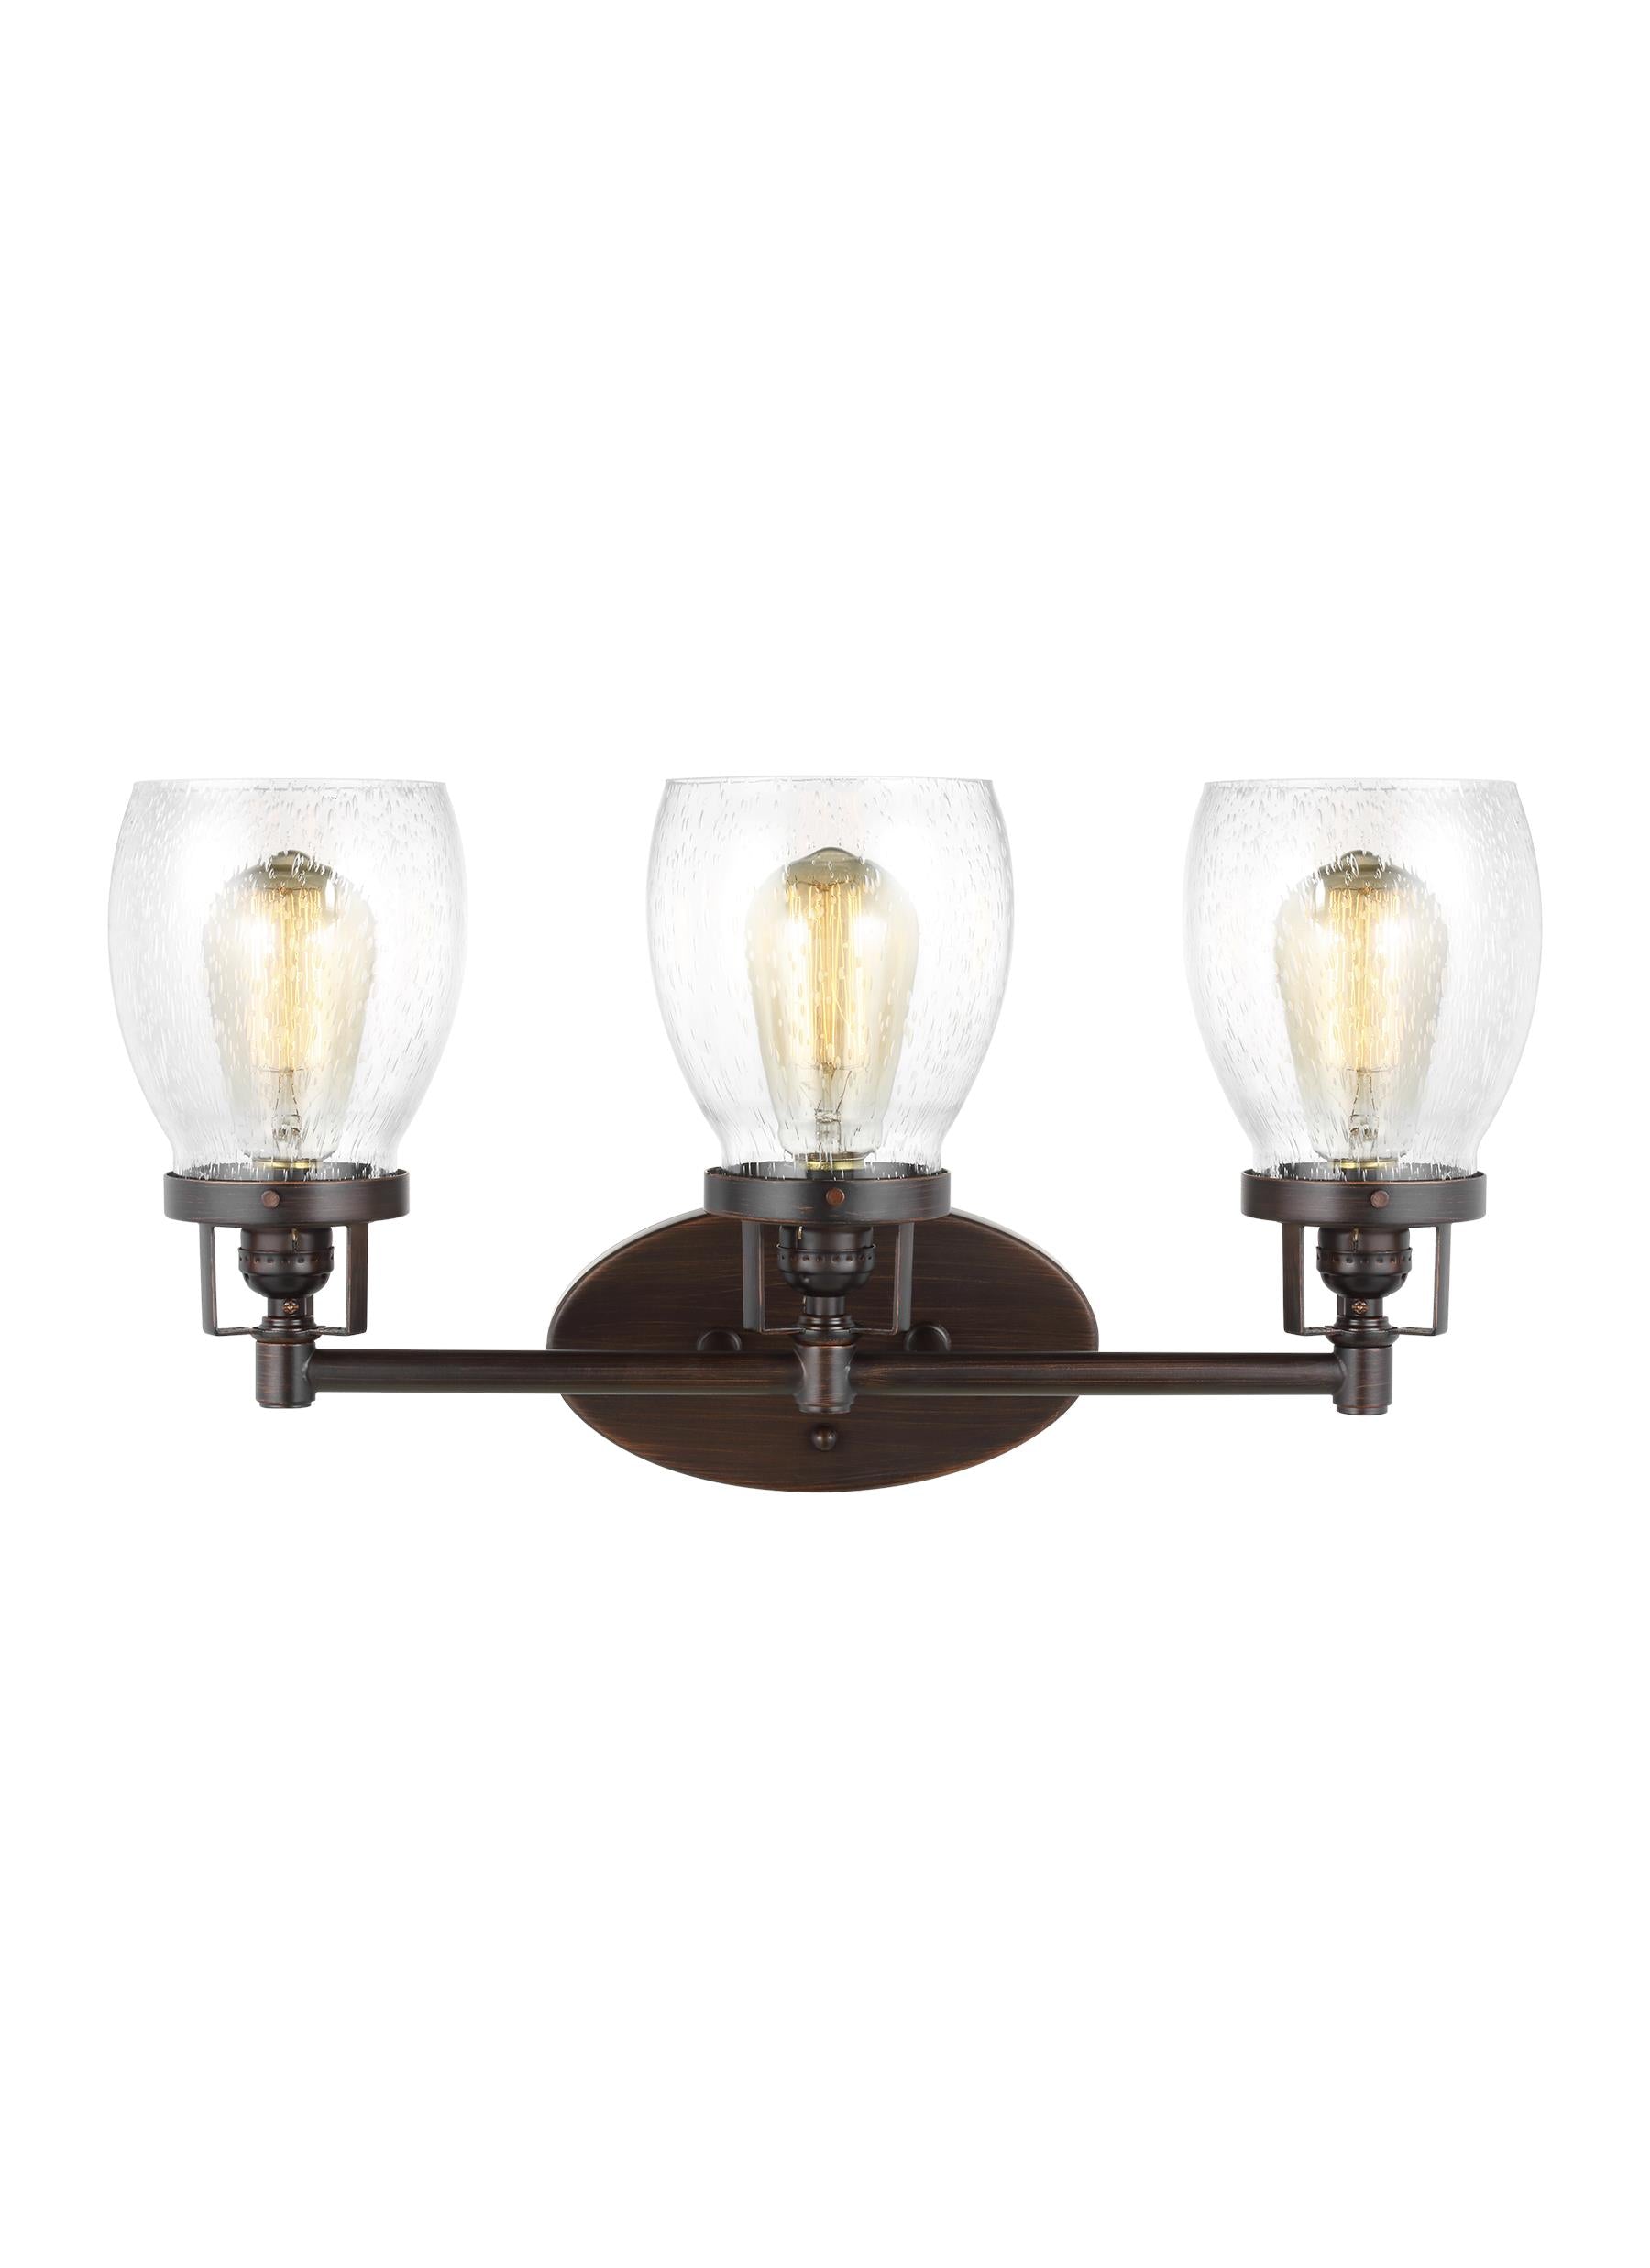 Belton transitional 3-light indoor dimmable bath vanity wall sconce in bronze finish with clear seeded glass shades